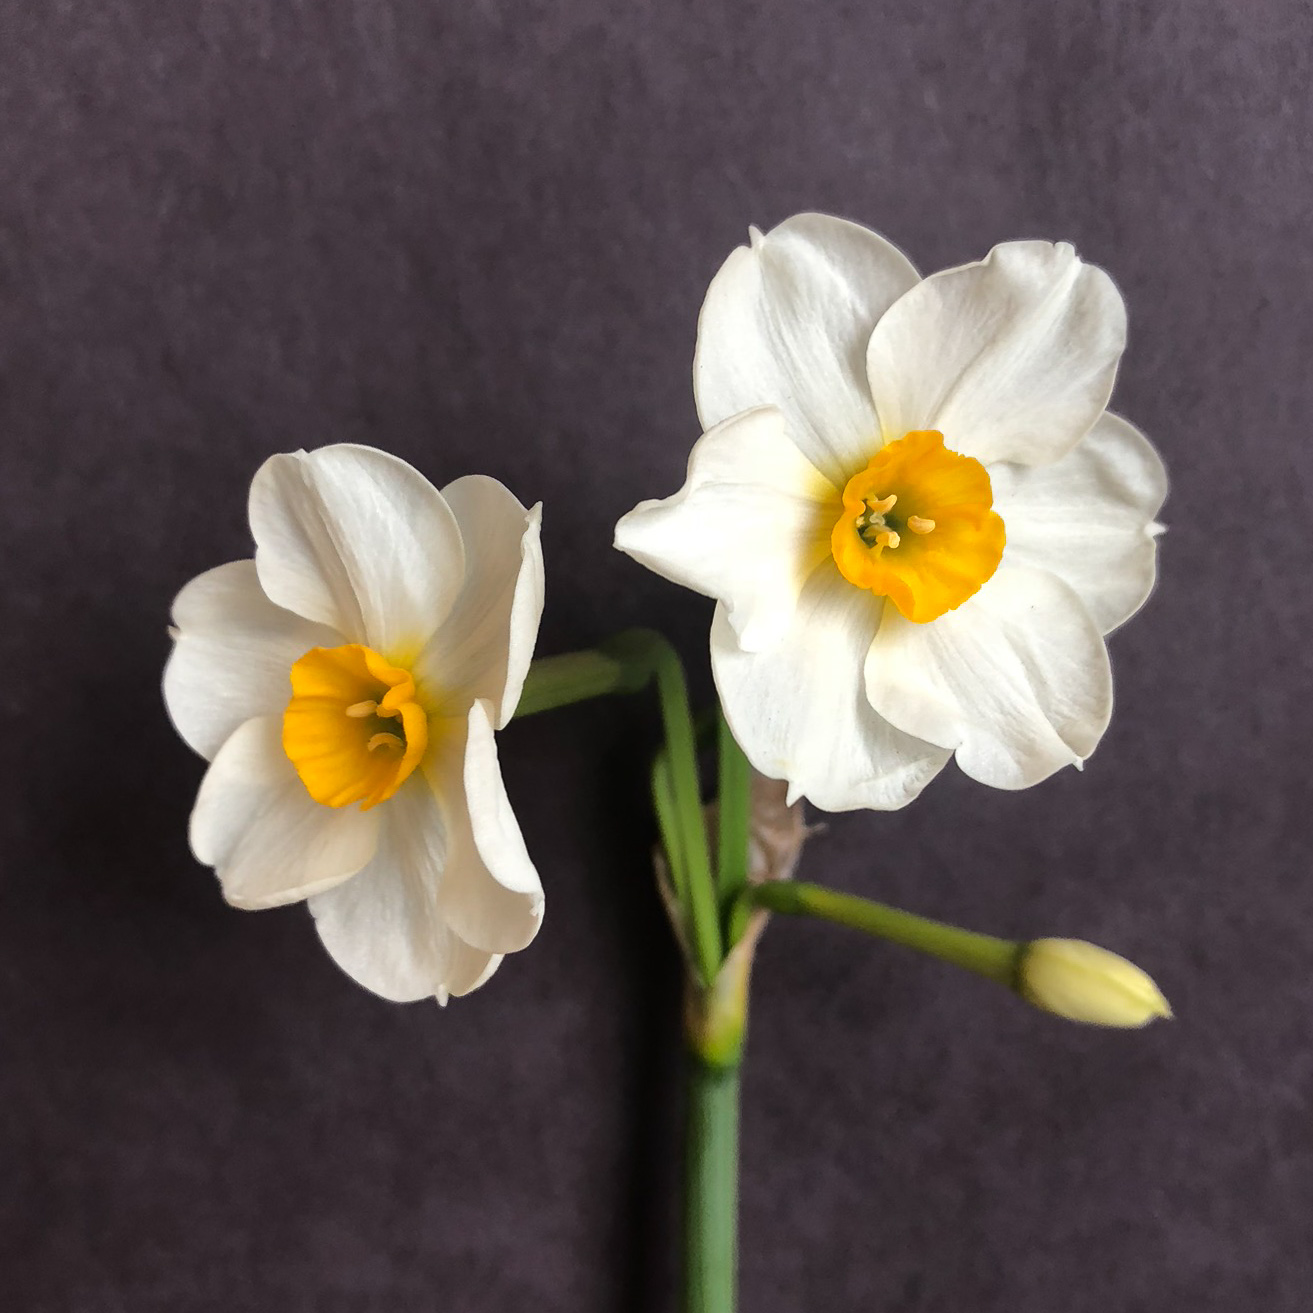 three quarter view of two narcissus beautiful eyes flowers on a single stem